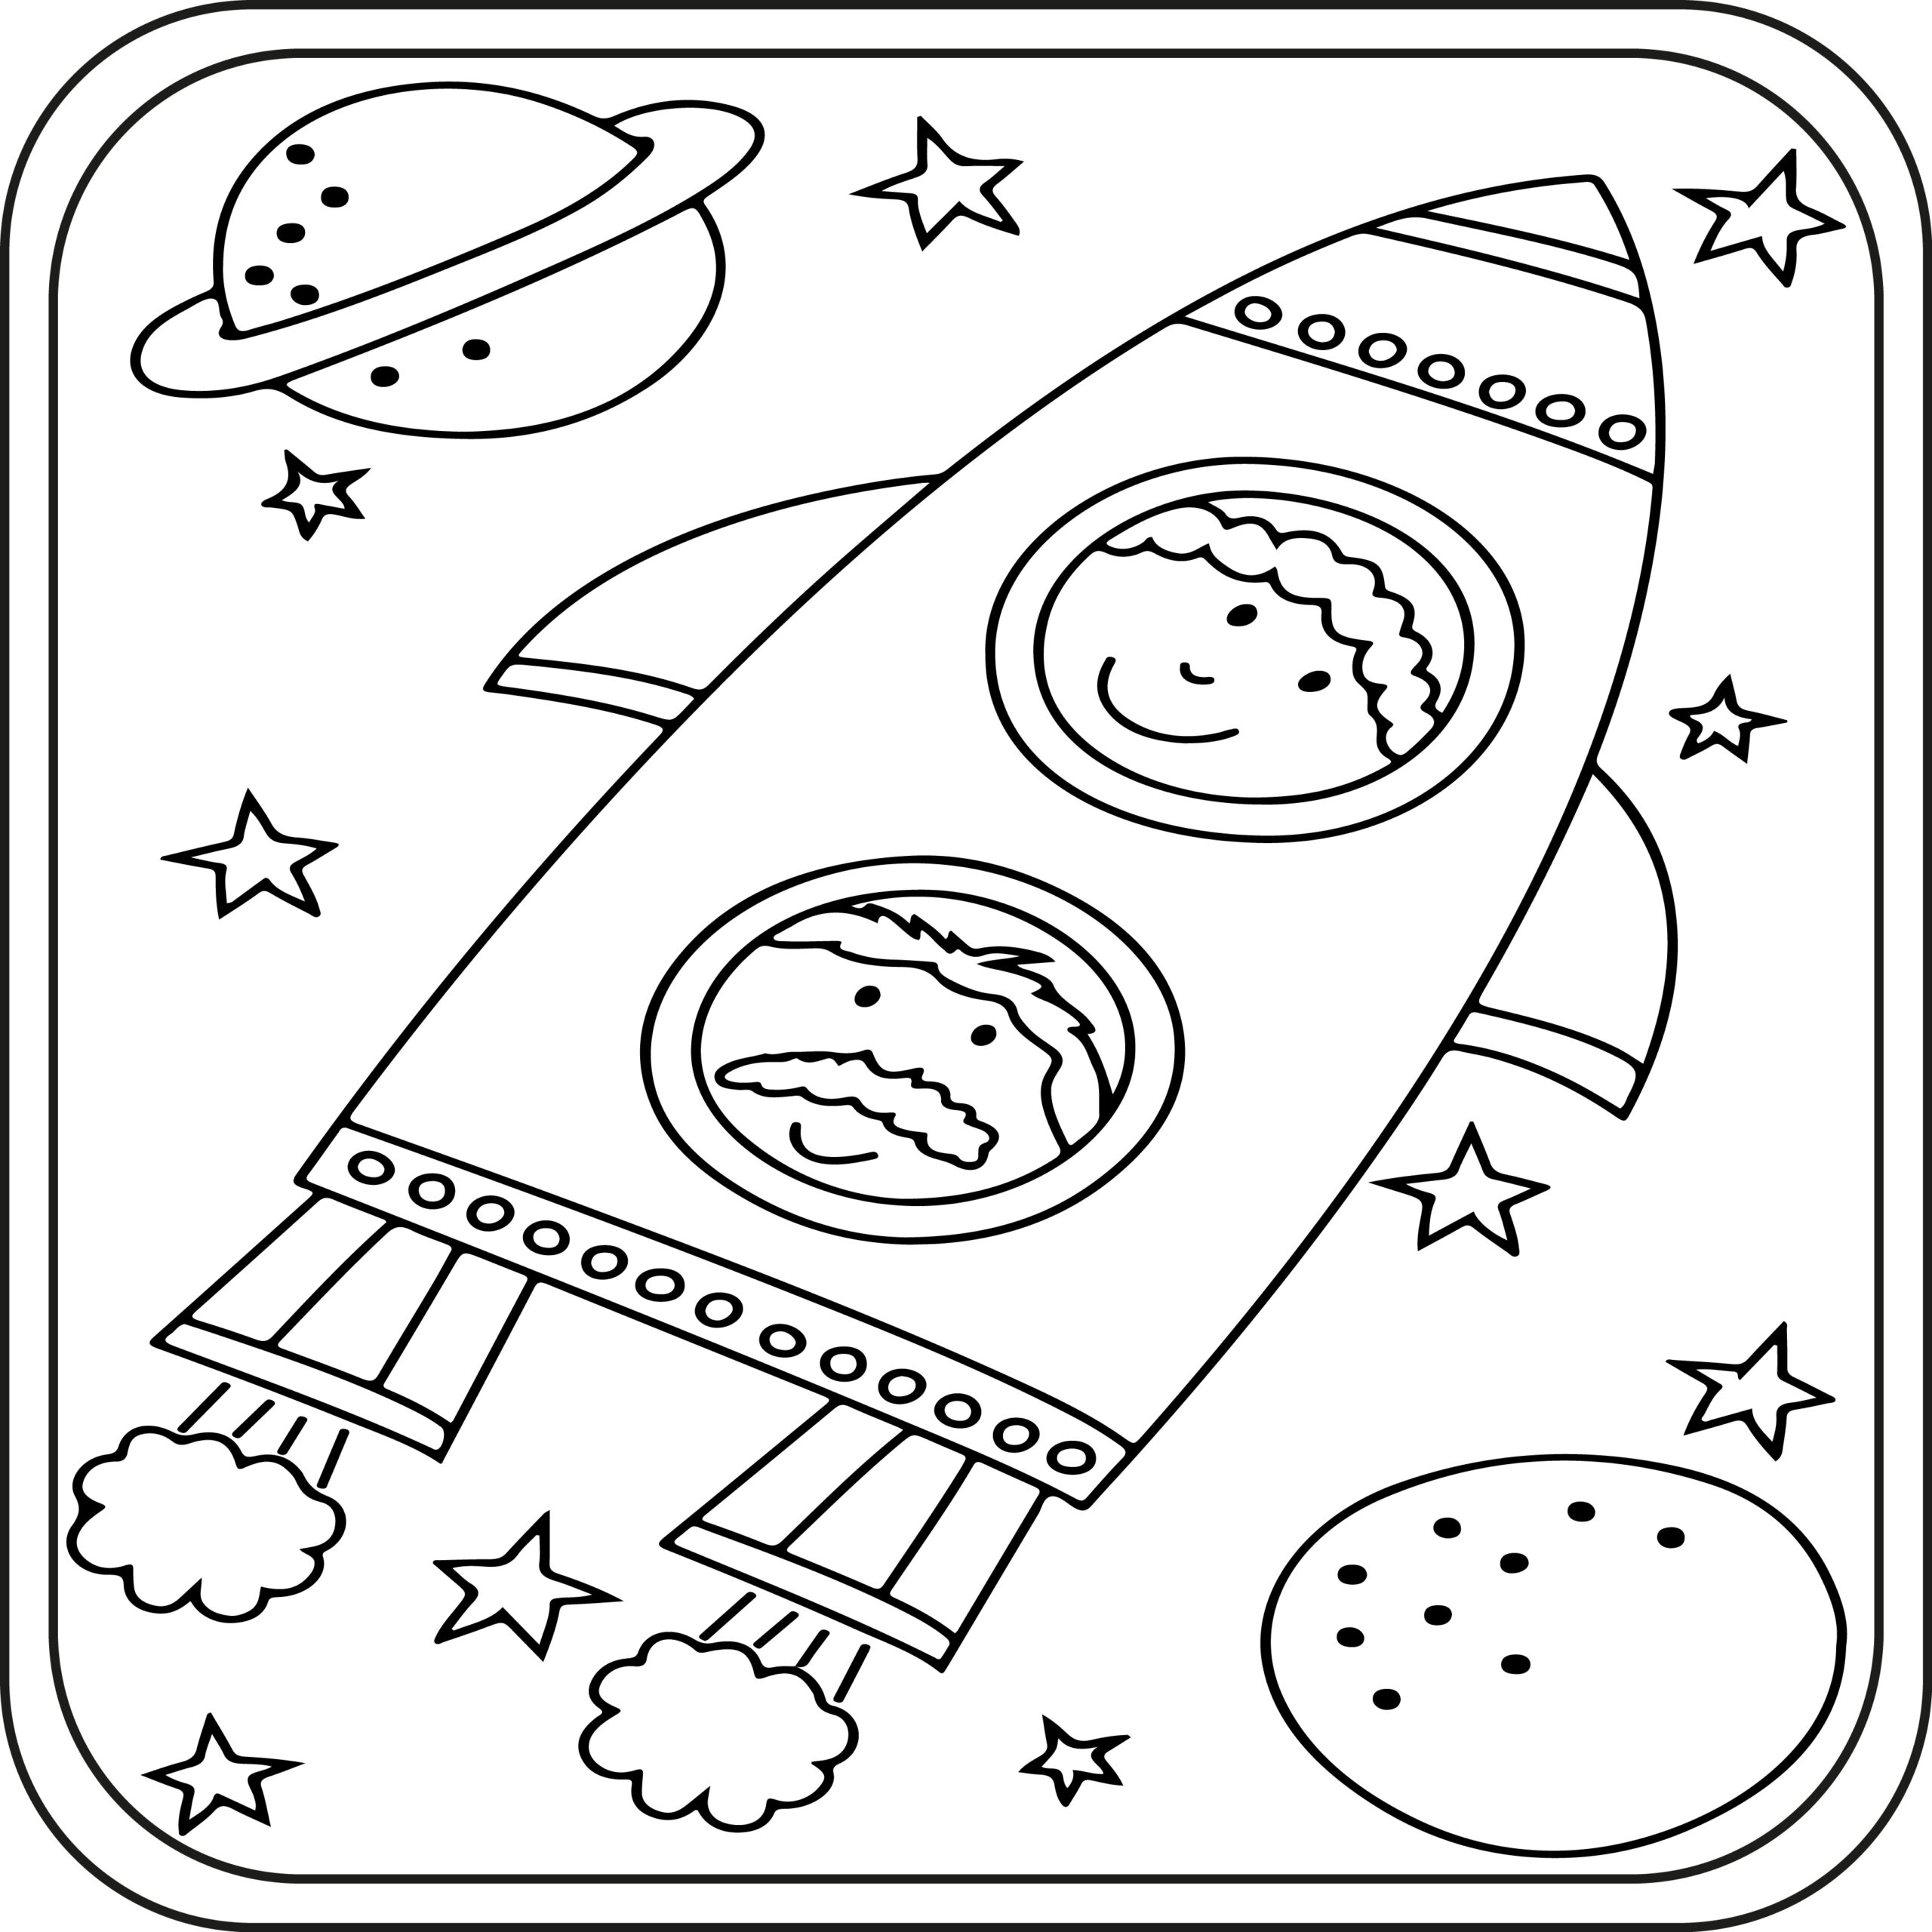 Space coloring pages preschool kindergarten first grade made by teachers